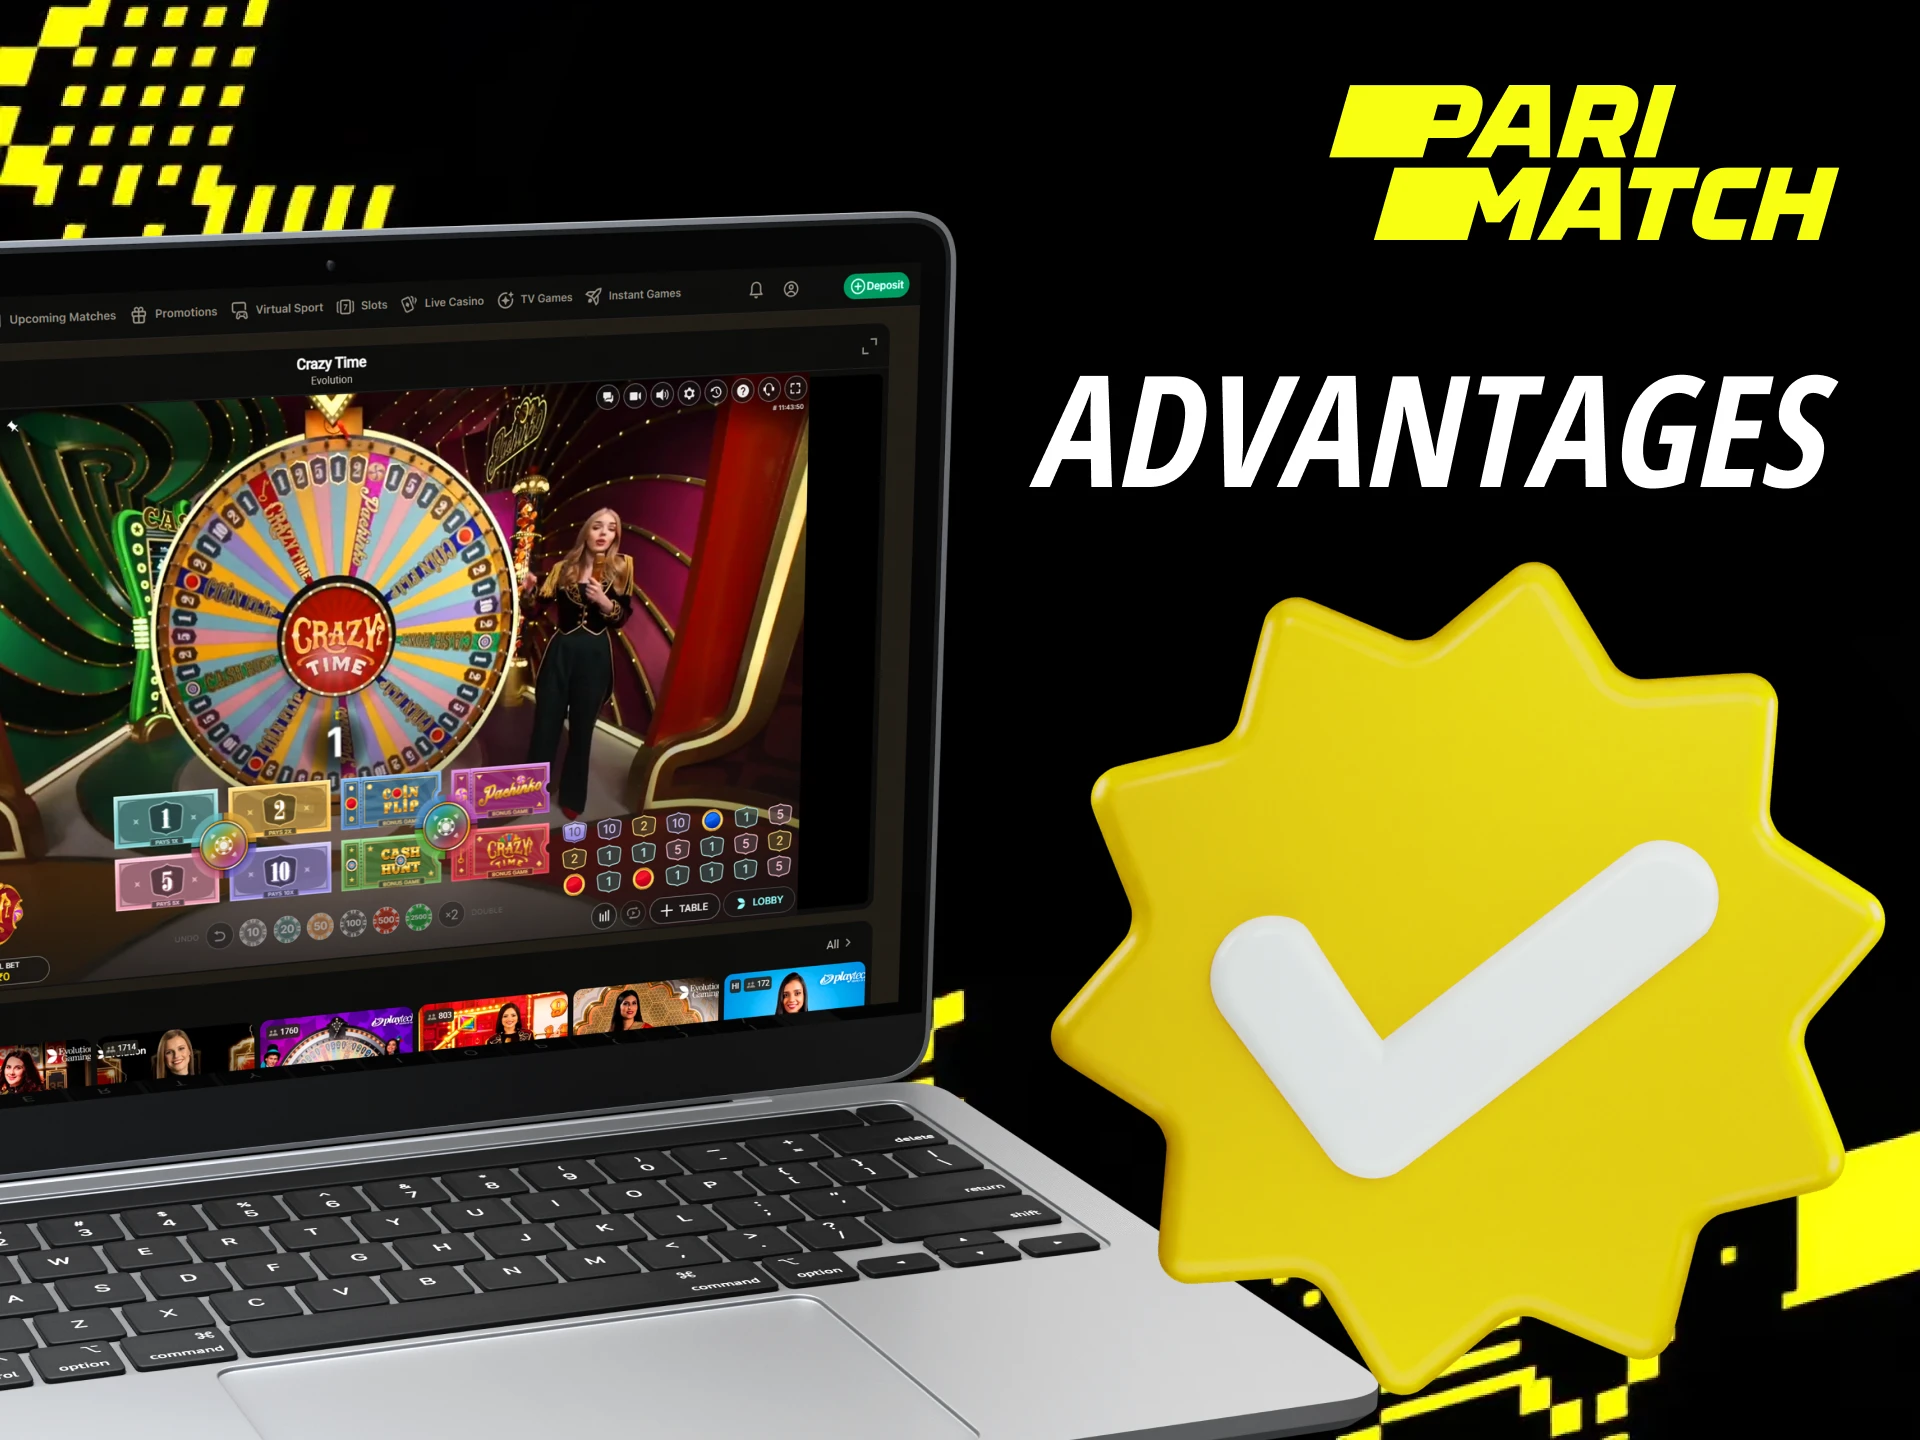 You can choose Parimatch to play Crazy Time because of its many advantages such as fast support, mobile site, license, etc.